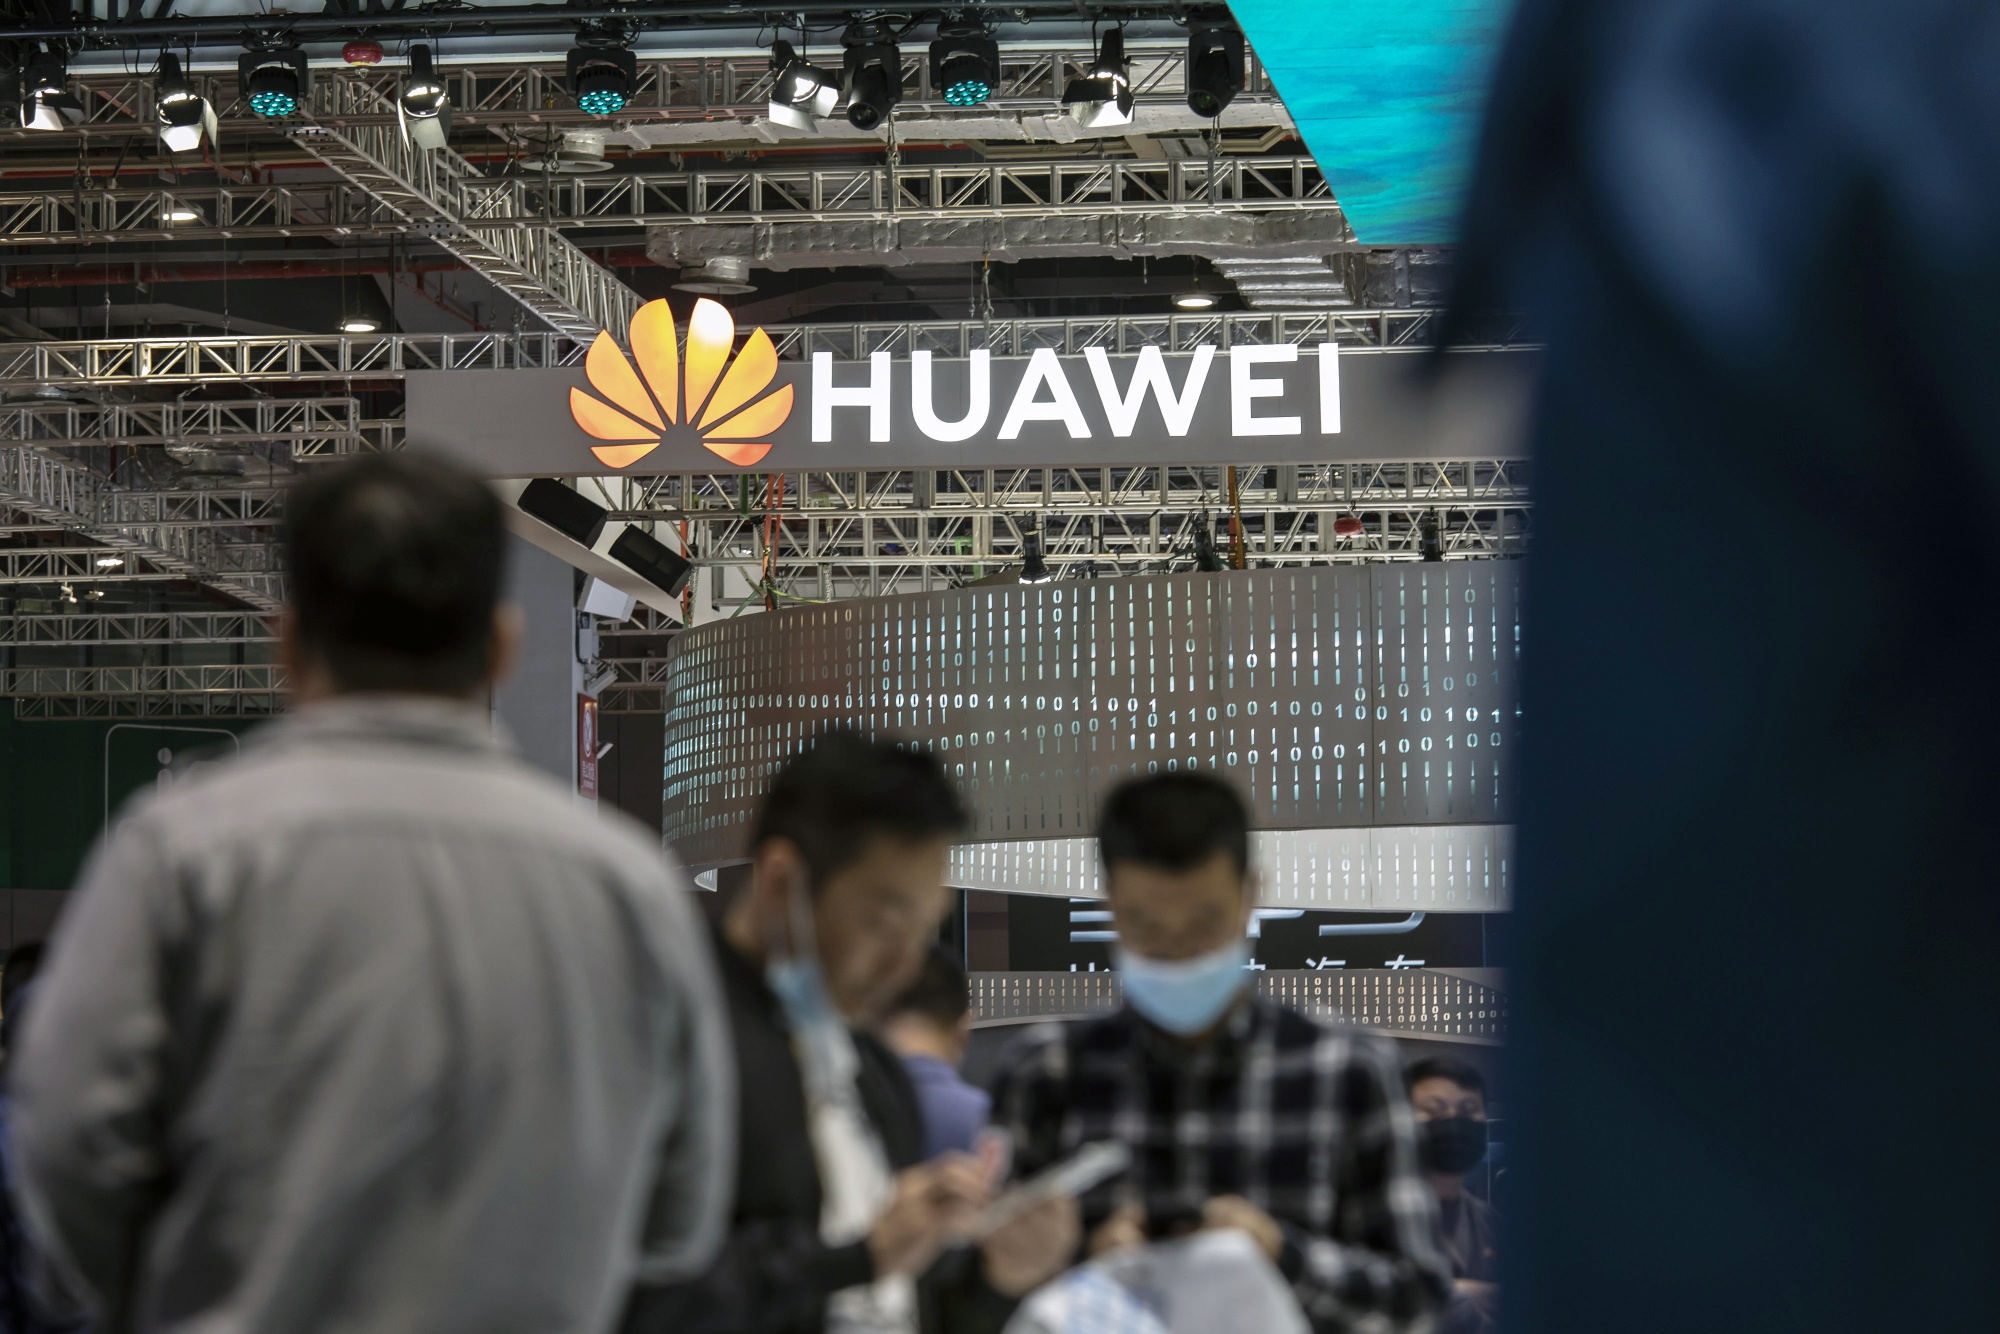 Sanction-hit Huawei says revenues down 29% this year, Huawei